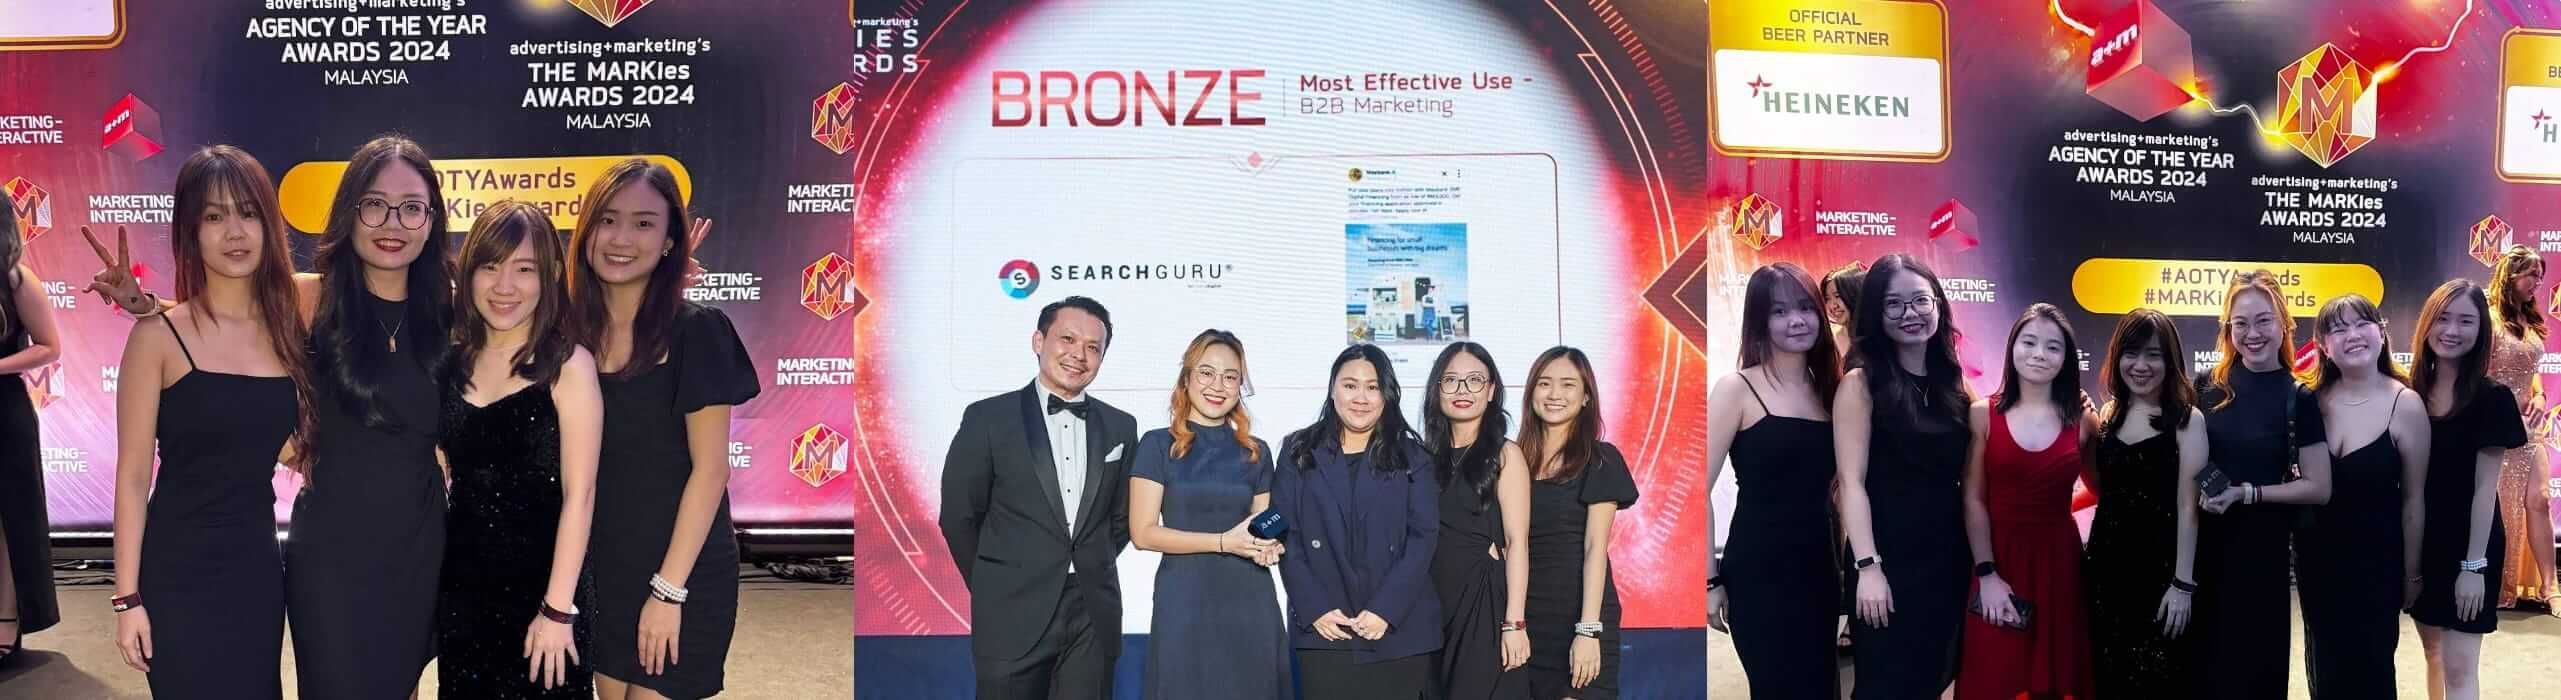 Our team won Bronze for Most Effective Use - B2B Marketing (Maybank)! What an achievement!